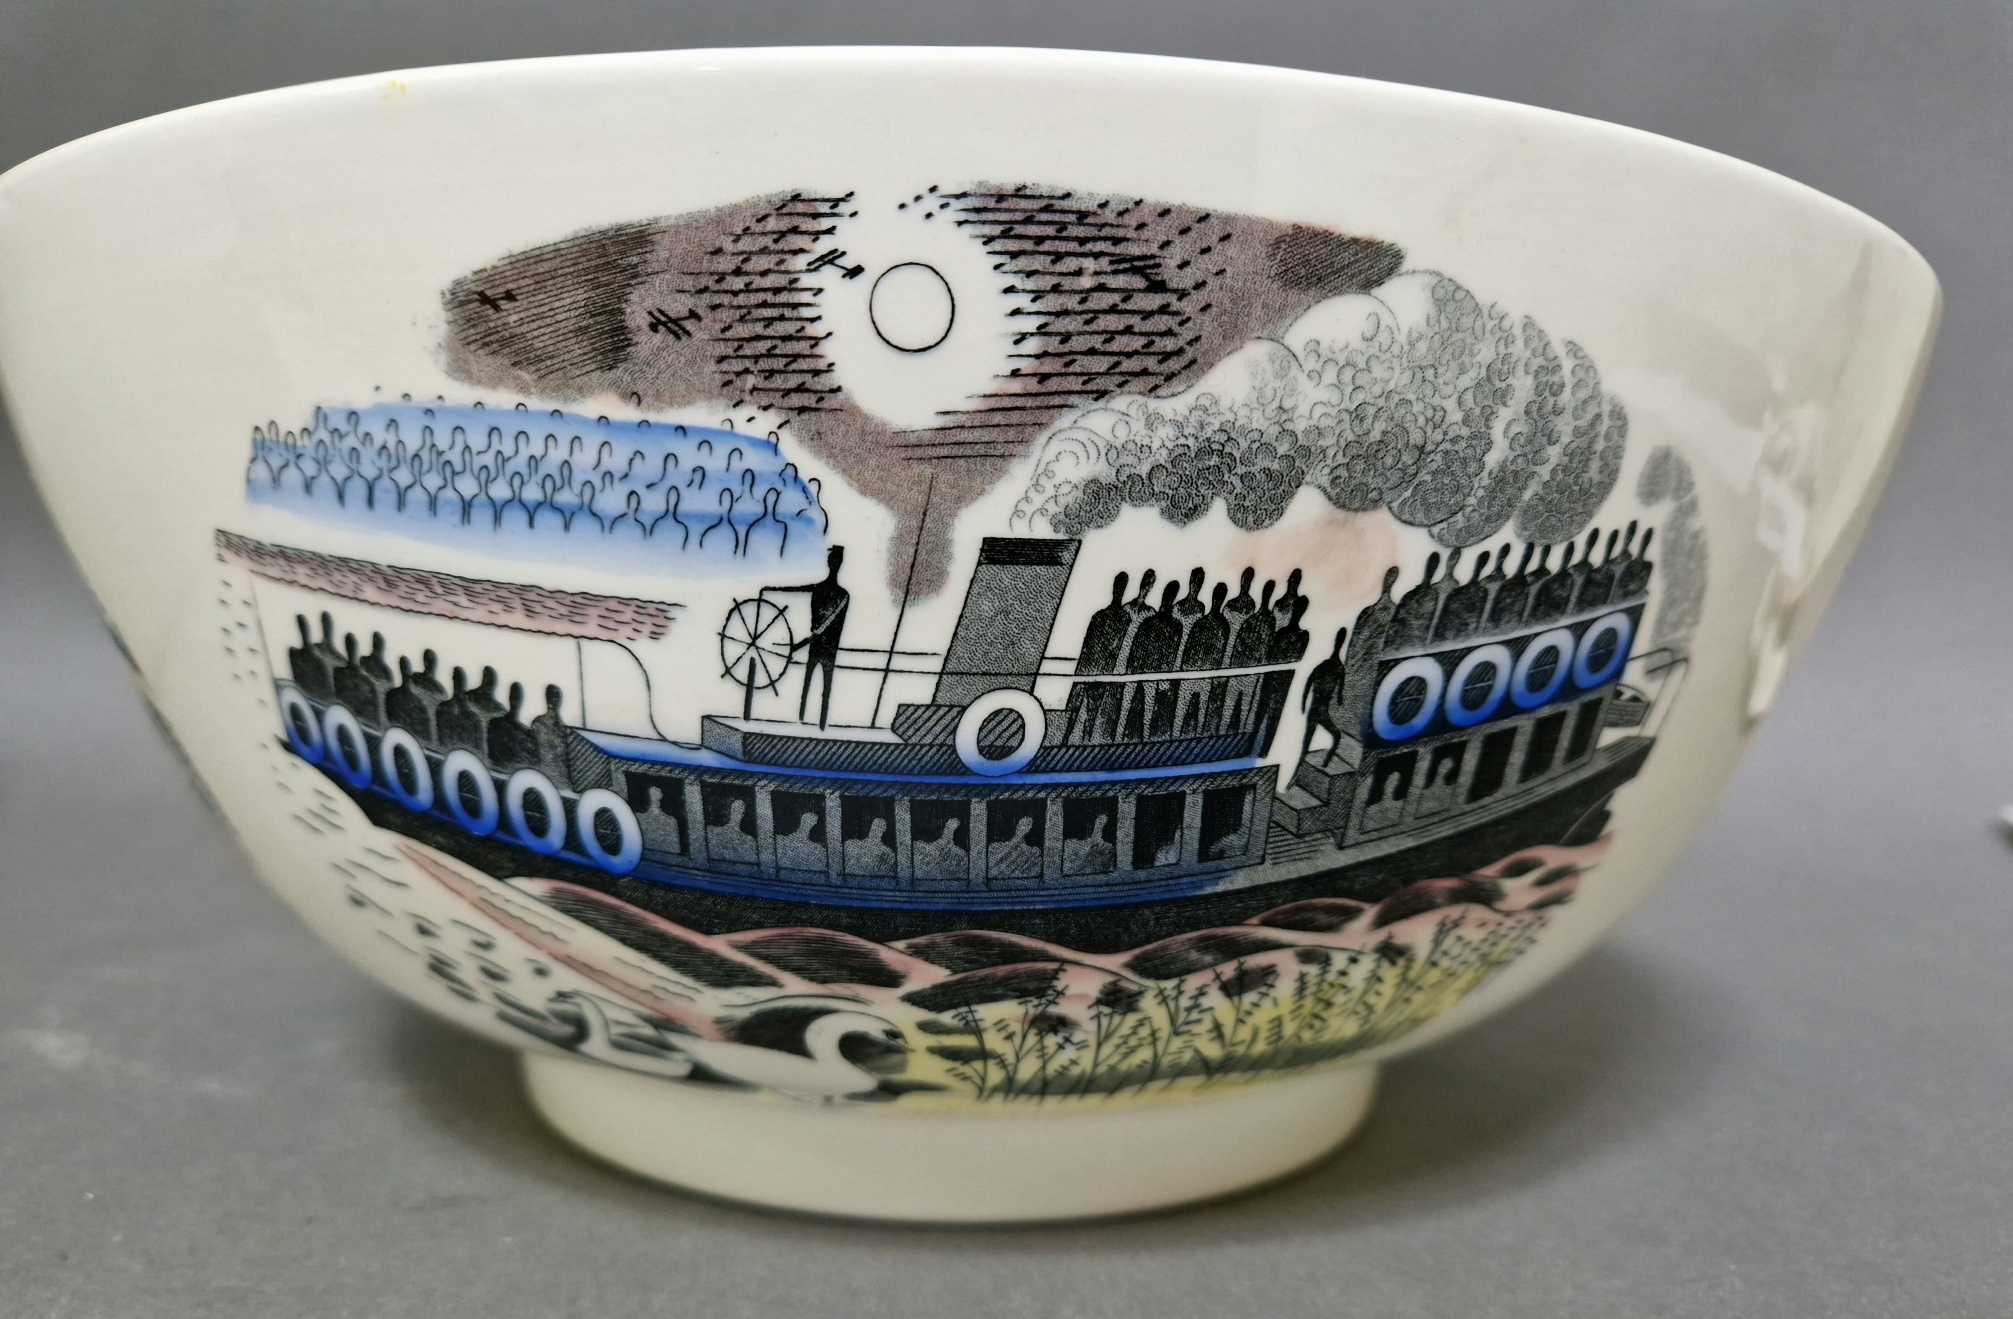 A 1975 Wedgwood Boat Race bowl designed by Eric Ravilious , limited edition no. 133/200, with box - Image 9 of 11